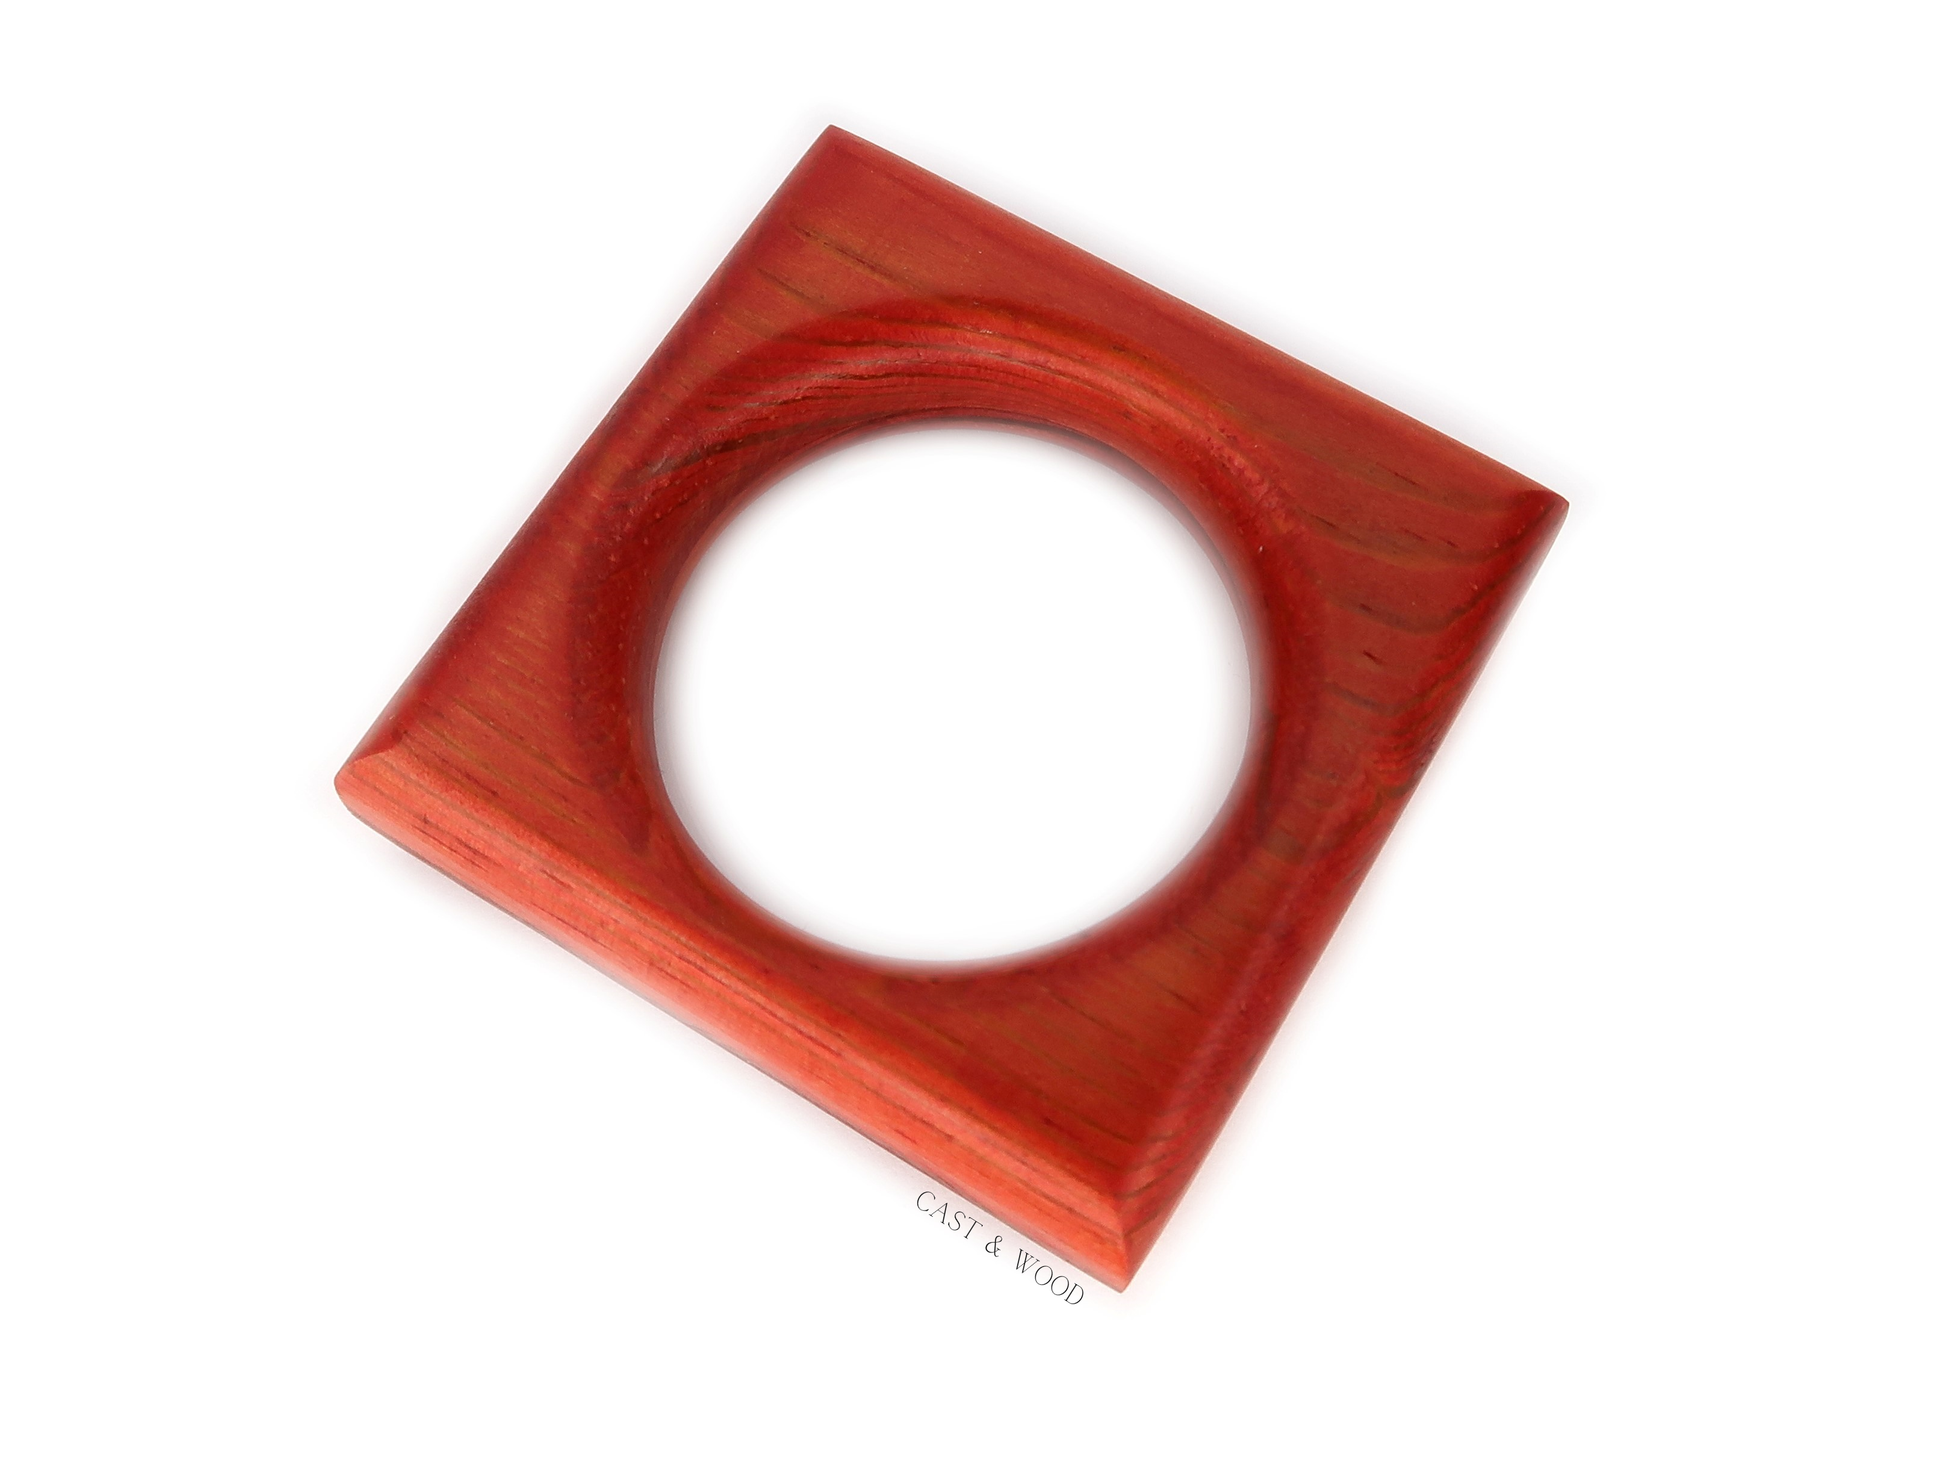 Napkin Rings - Red Cast & Wood